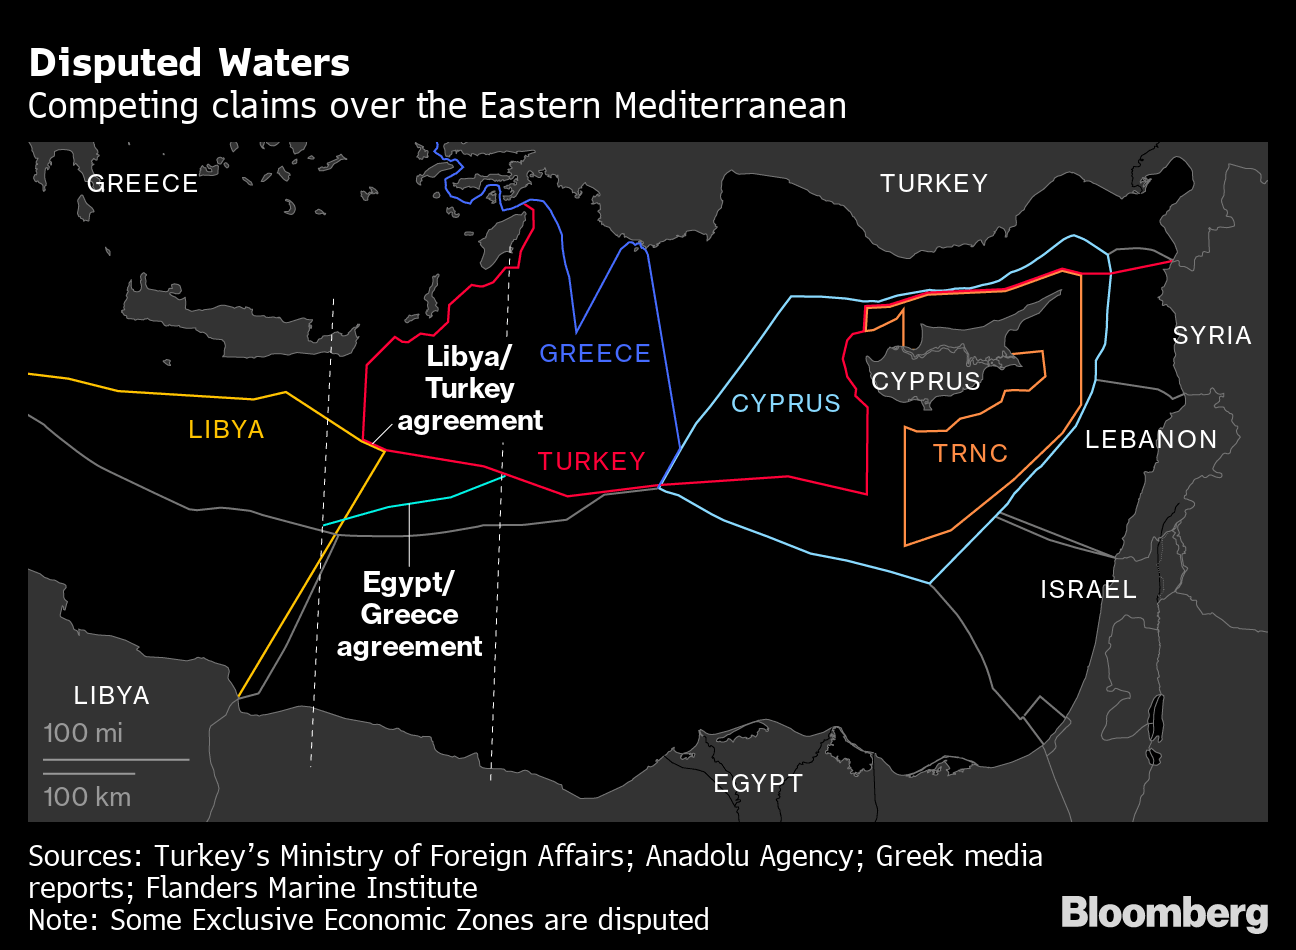 Turkey Signals Push for Deal on Maritime Boundary With Egypt - Bloomberg